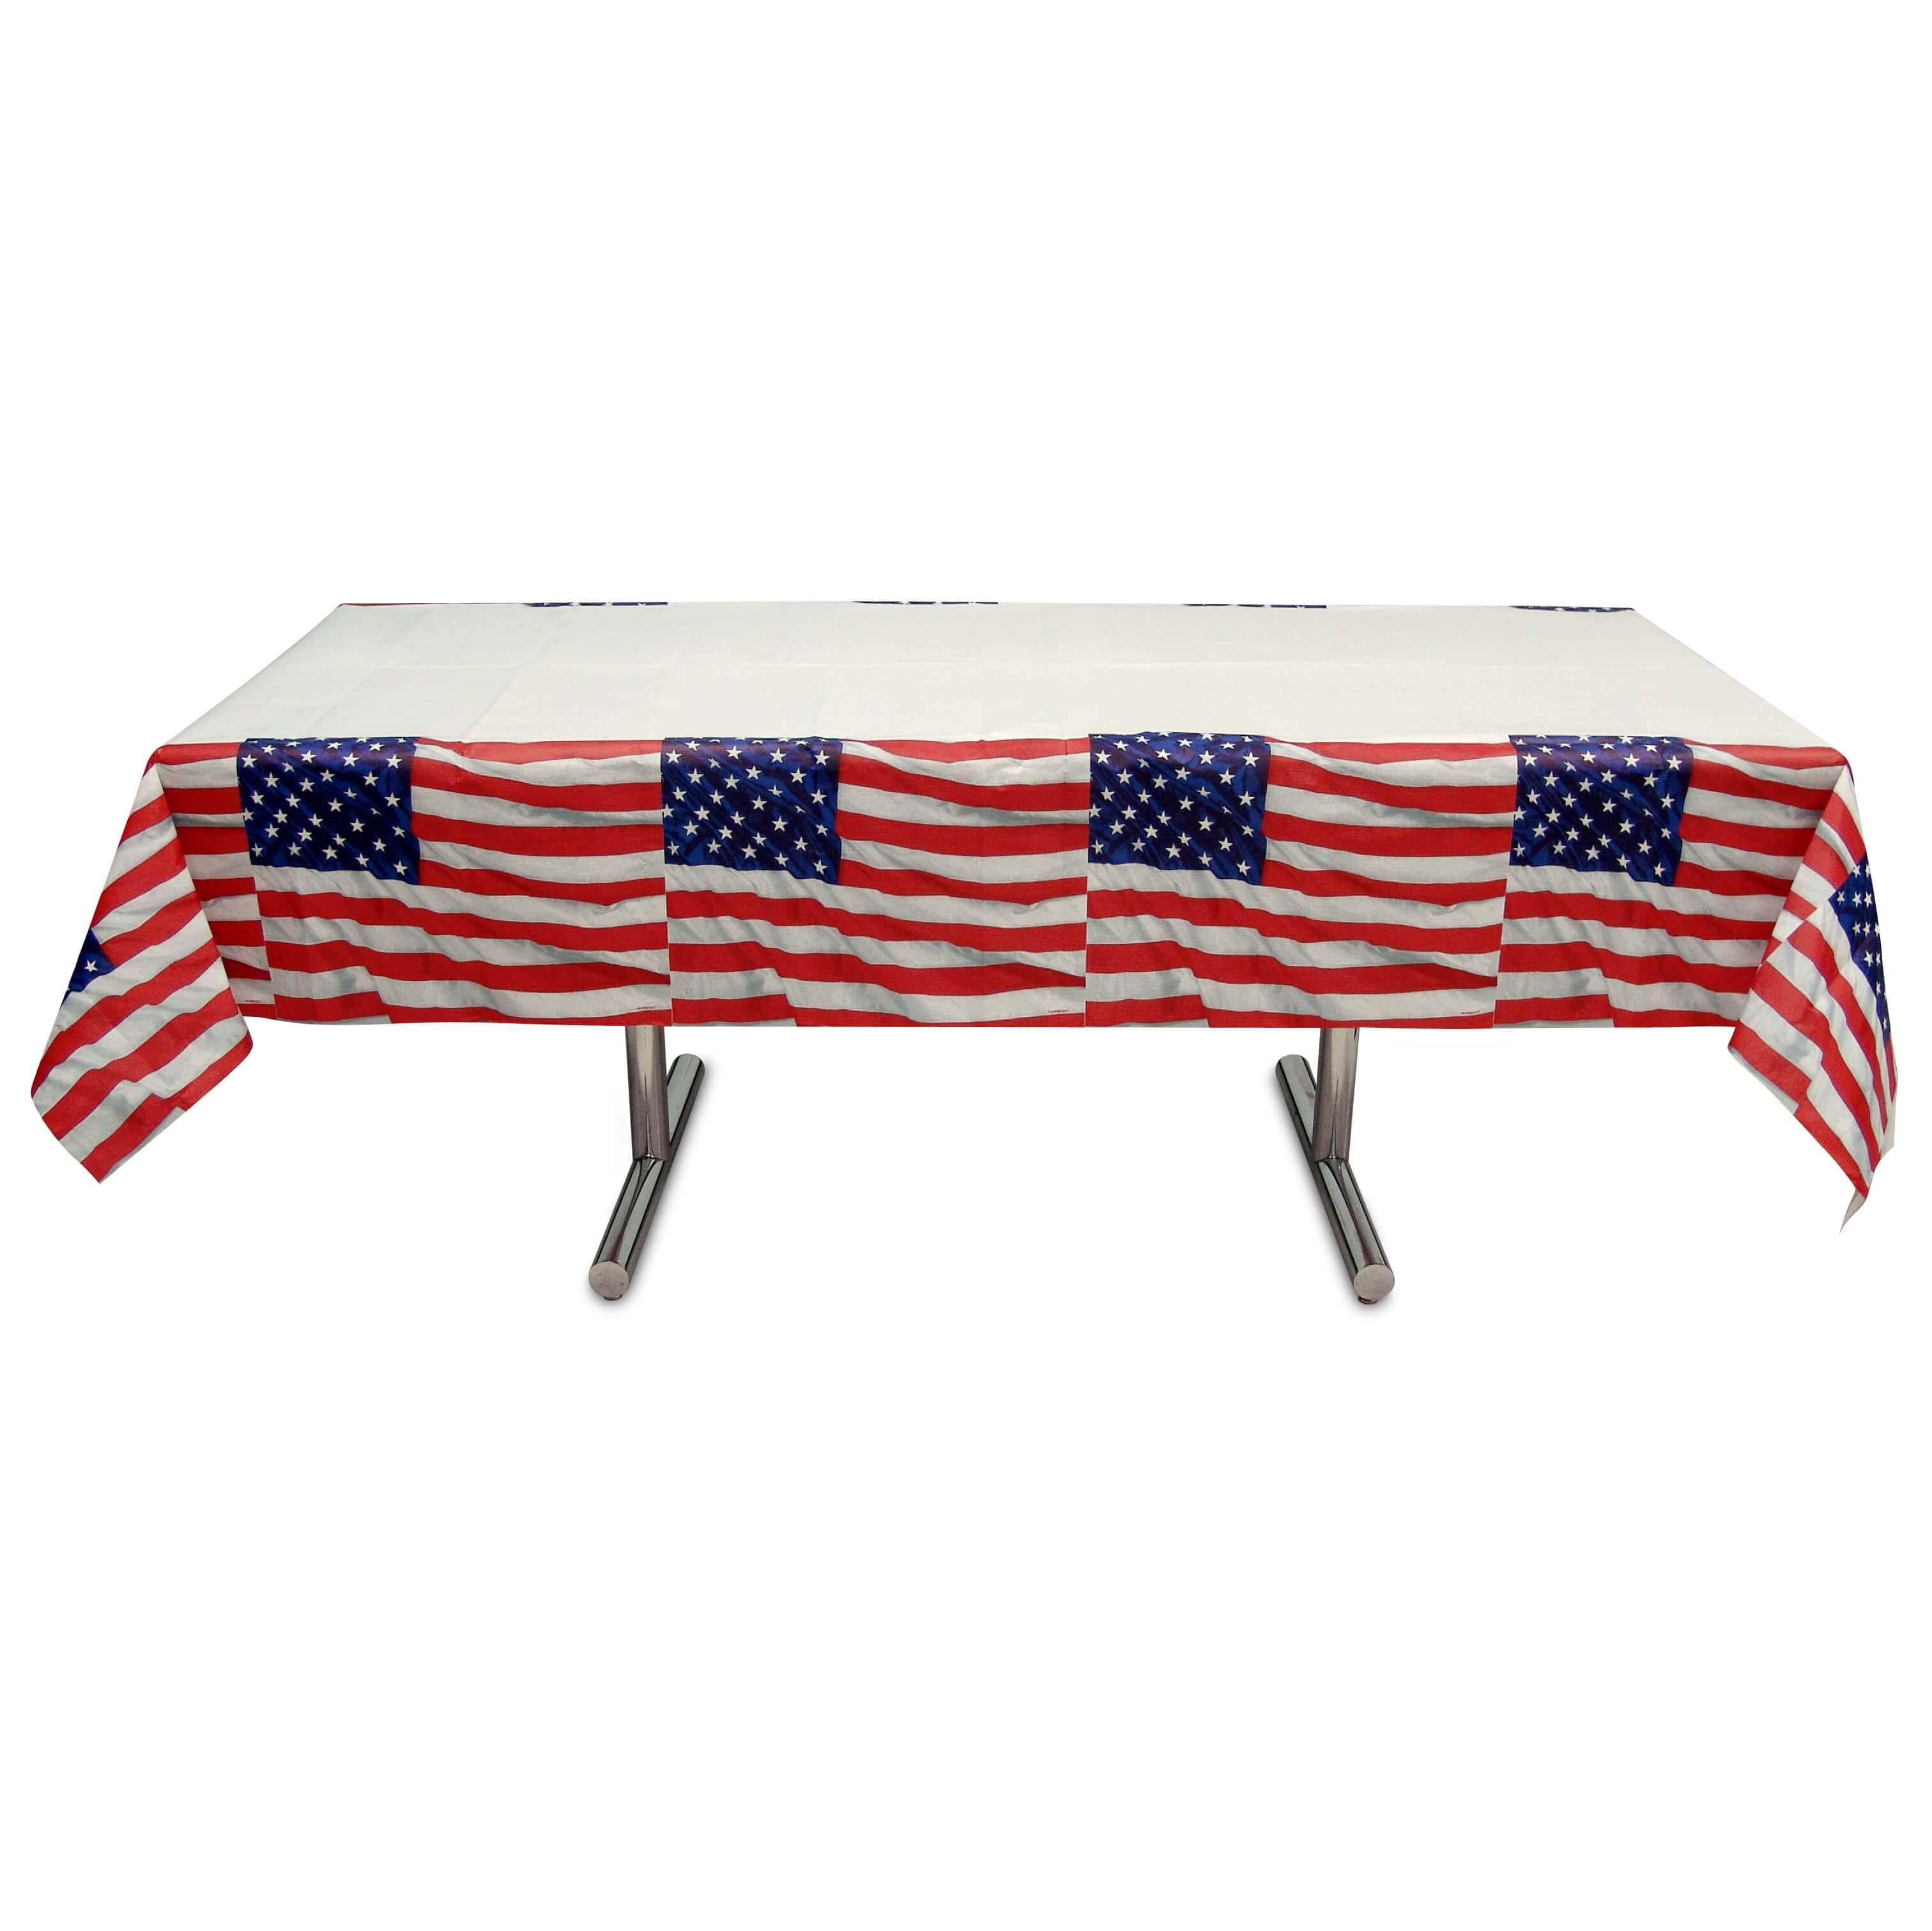 4th of July decorations for the table